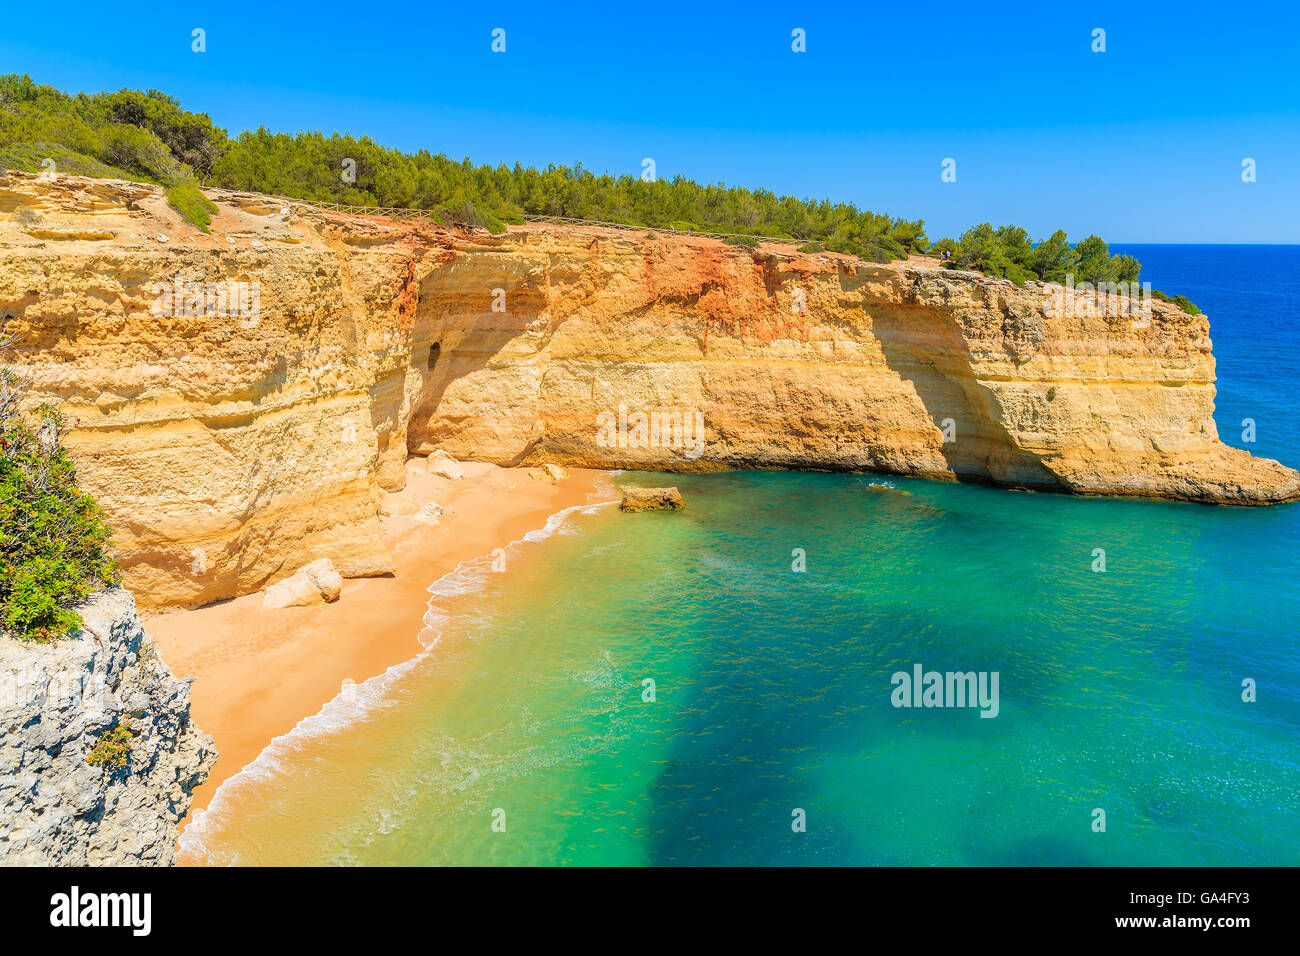 View of beautiful beach with crystal clear turquoise water near Carvoeiro town, Algarve region, Portugal Stock Photo